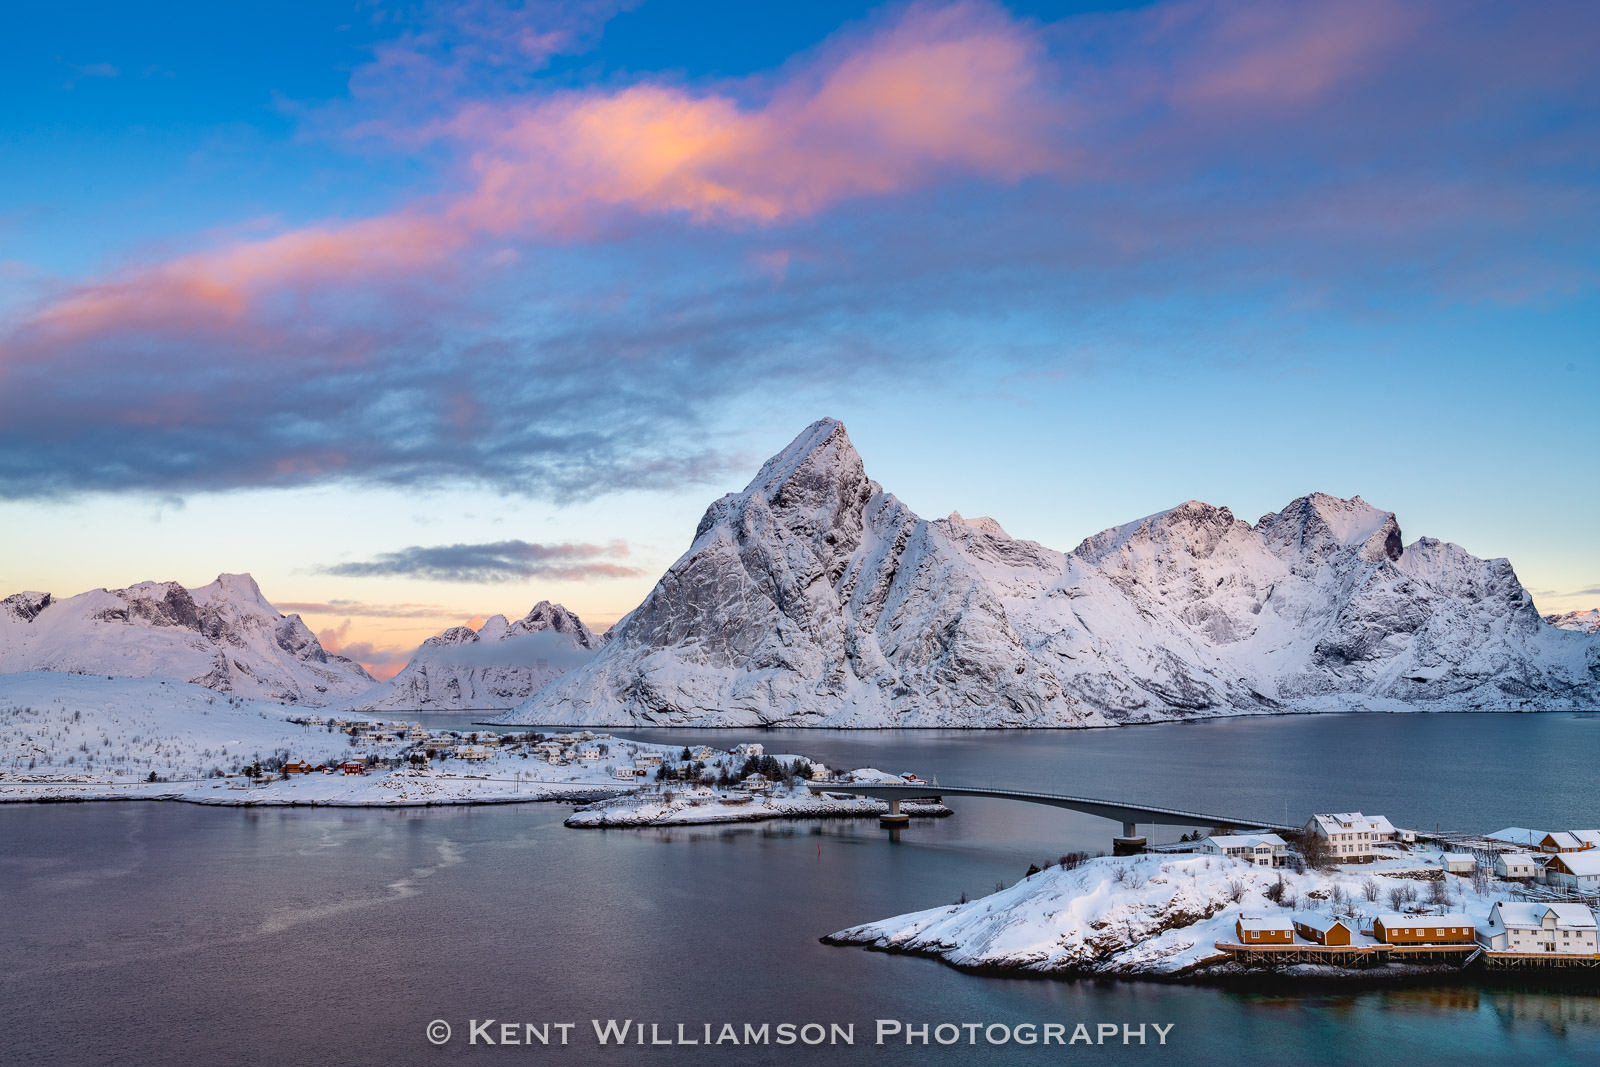 Majestic mountains in winter tower above the fishing villages of Sakrisøy in the Lofoten Islands, Norway, 2019